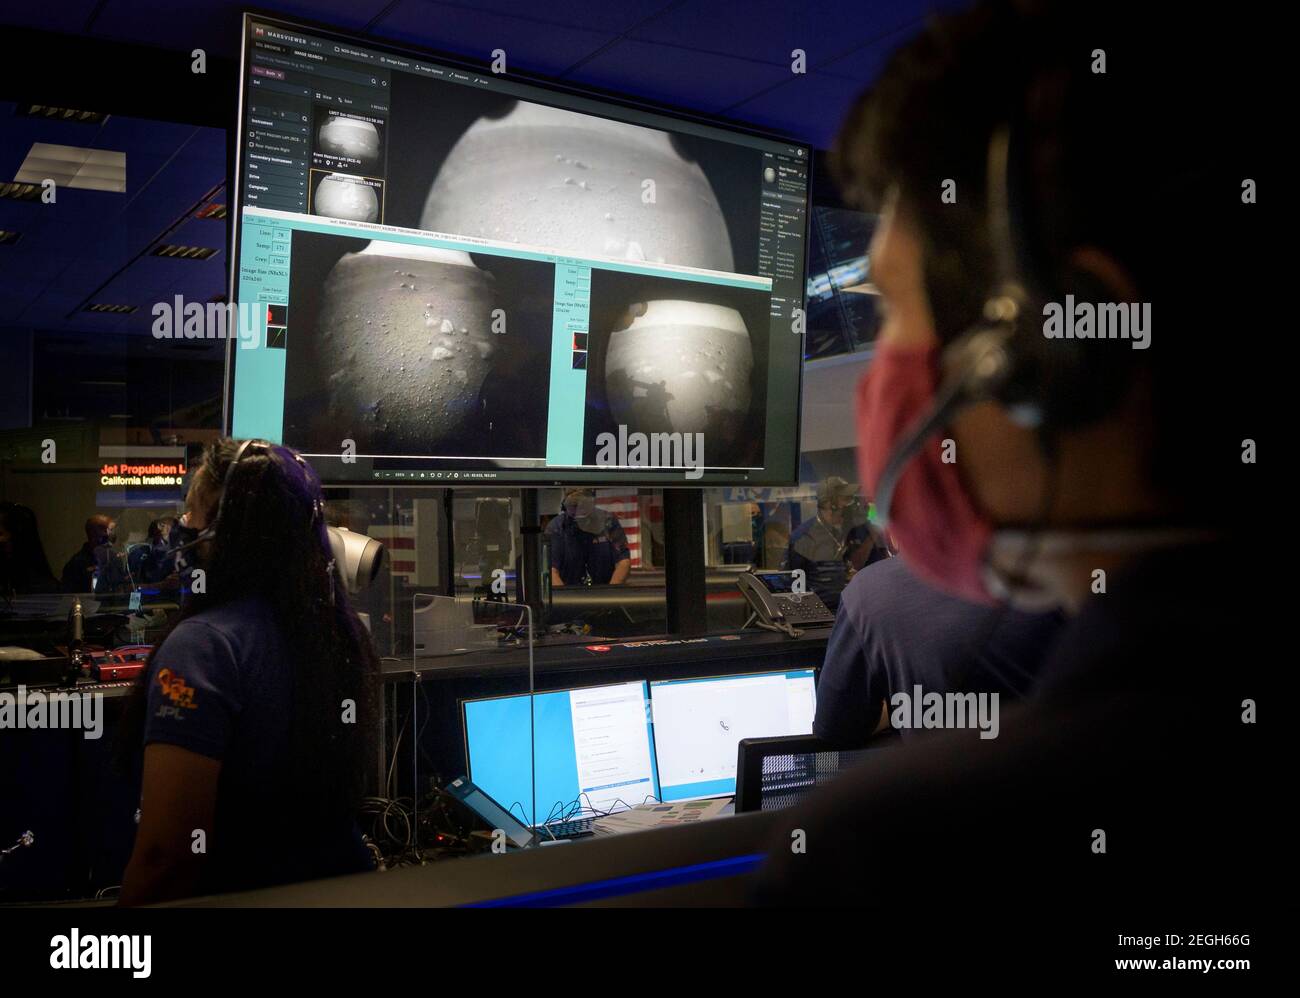 Pasadena, United States Of America. 18th Feb, 2021. Members of the NASA Perseverance Mars rover mission team watch monitors as the first images arrive moments after the spacecraft successfully touched down on the surface of the Red Planet at the NASA Jet Propulsion Laboratory February 18, 2021 in Pasadena, California. Credit: Planetpix/Alamy Live News Stock Photo